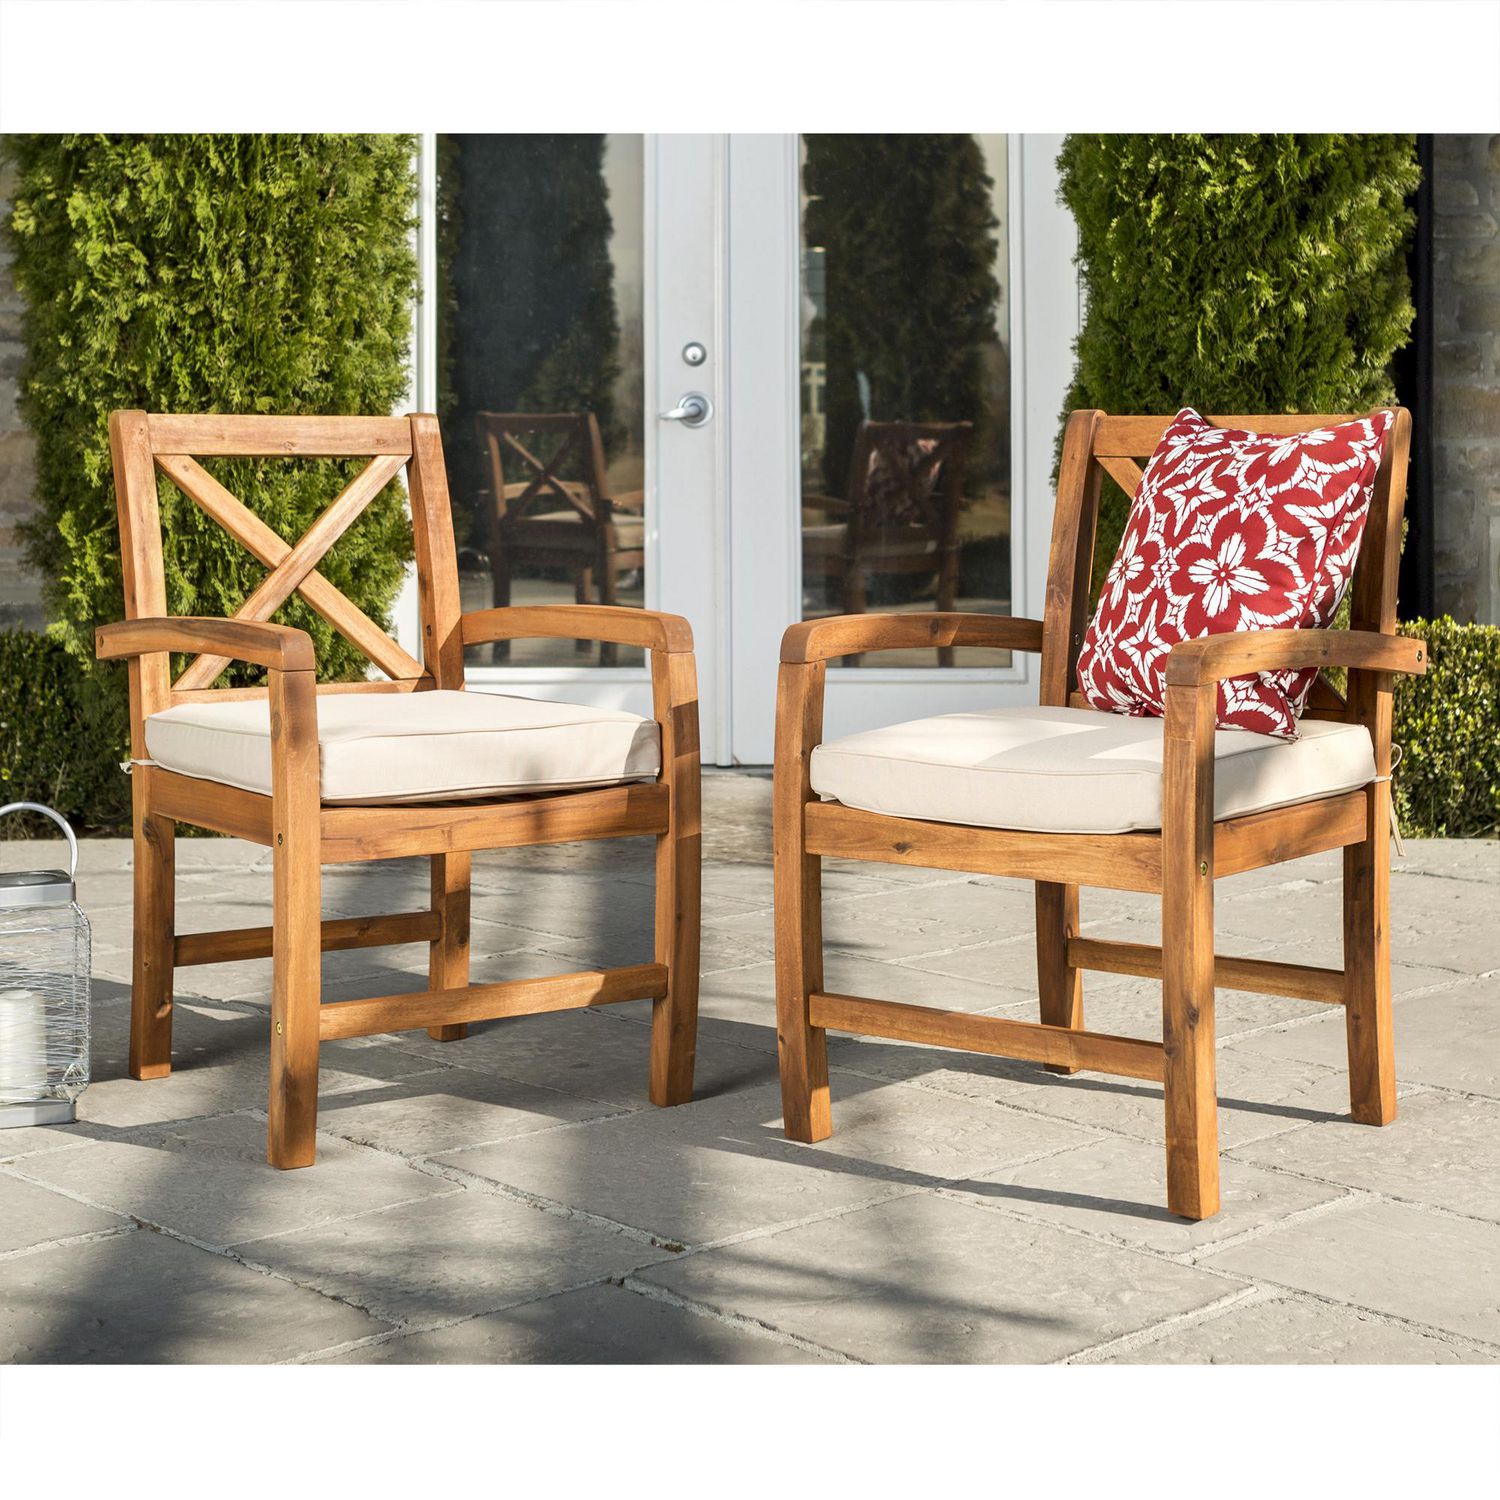 Manor Park Wood X Back Outdoor Patio, Outdoor Wood Chairs With Cushions